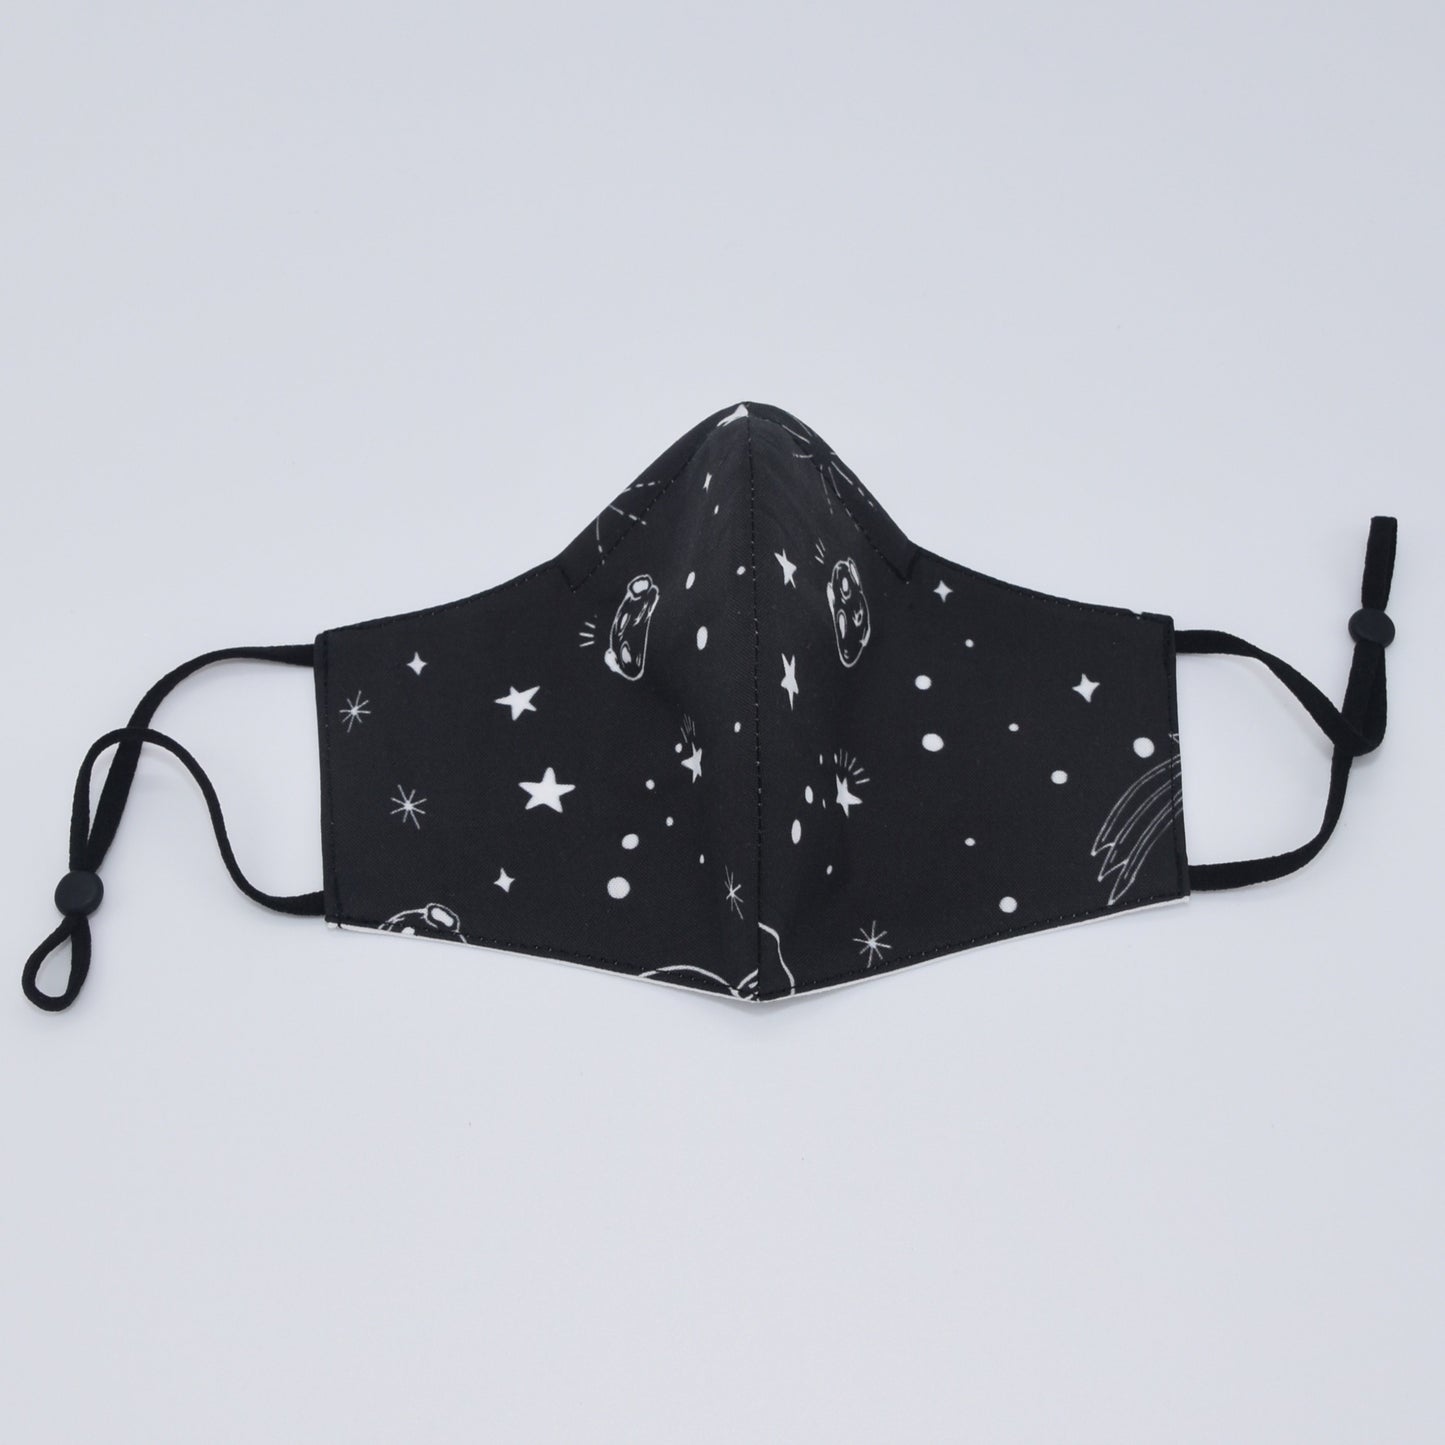 This black space print reversible face mask is made with one of our heavier-weight cotton novelty fabrics to provide a sturdier outer shell and the ultimate combination of both structure and comfort. Reversible and double-layered. Built with an adjustable nose bridge and adjustable ear straps. 